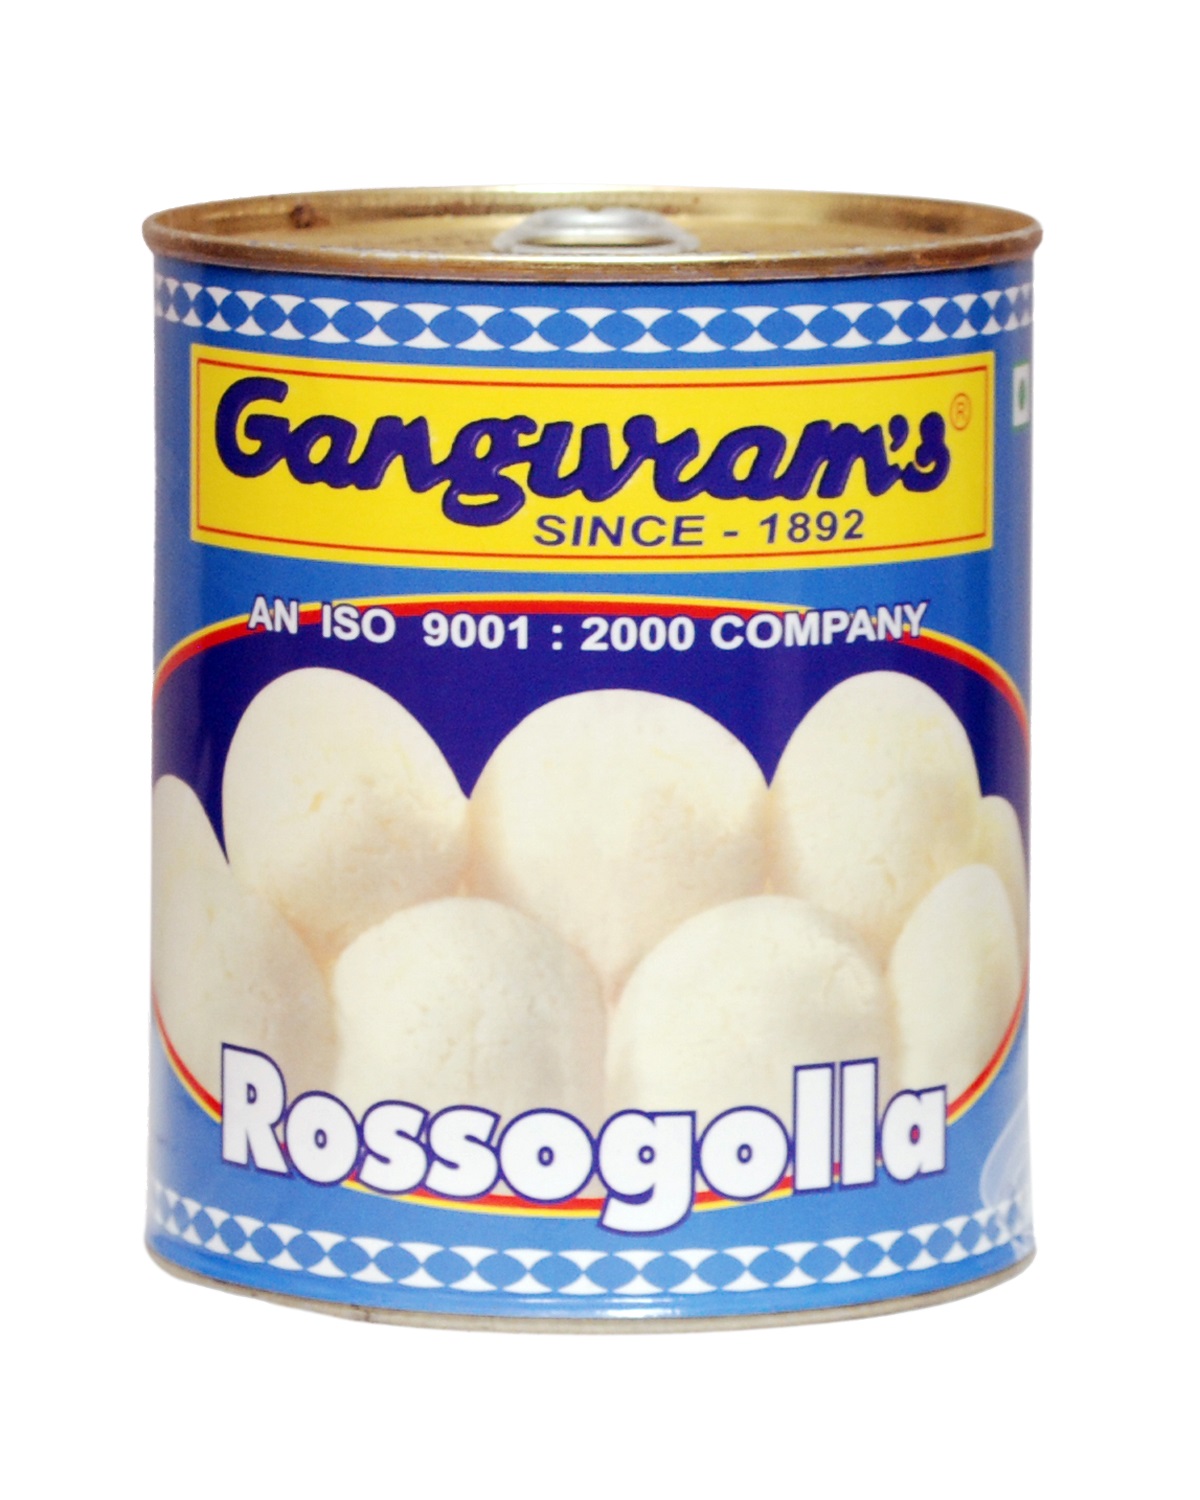 Tin Packed Rossogolla